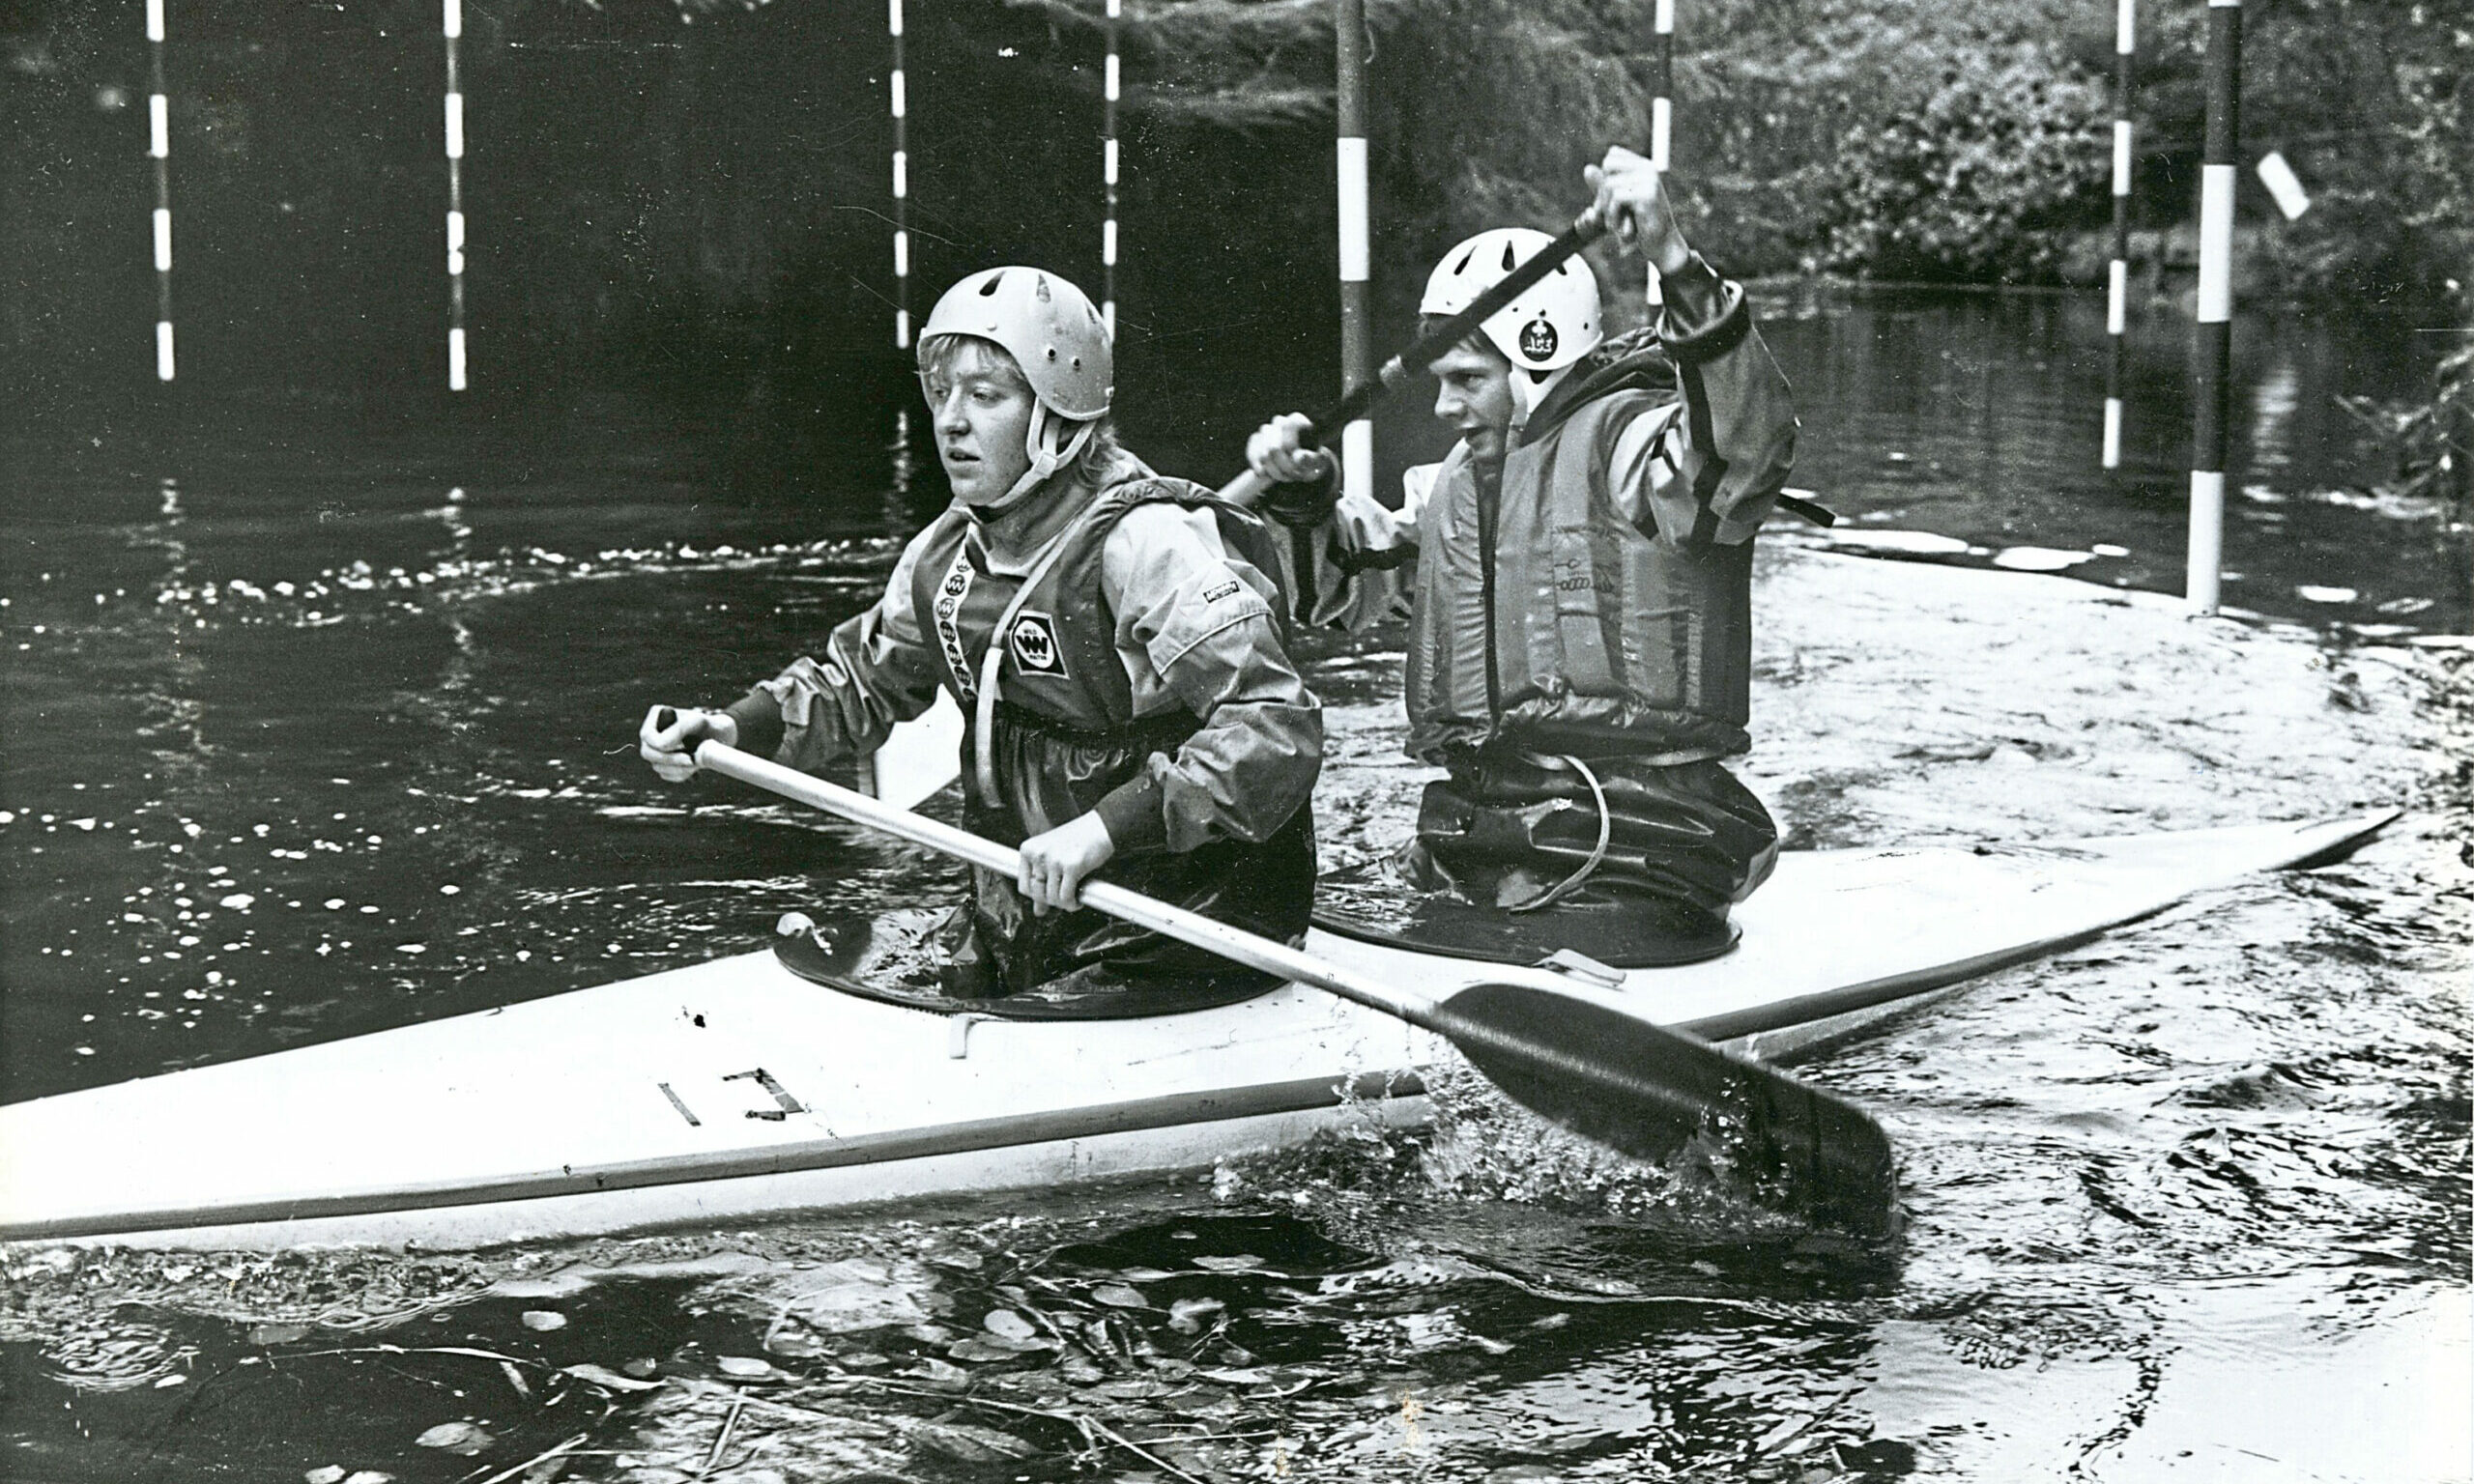 1986 - Fiona Weir and Graham Morrison of the kayak club tackle the course in their Canadian canoe.